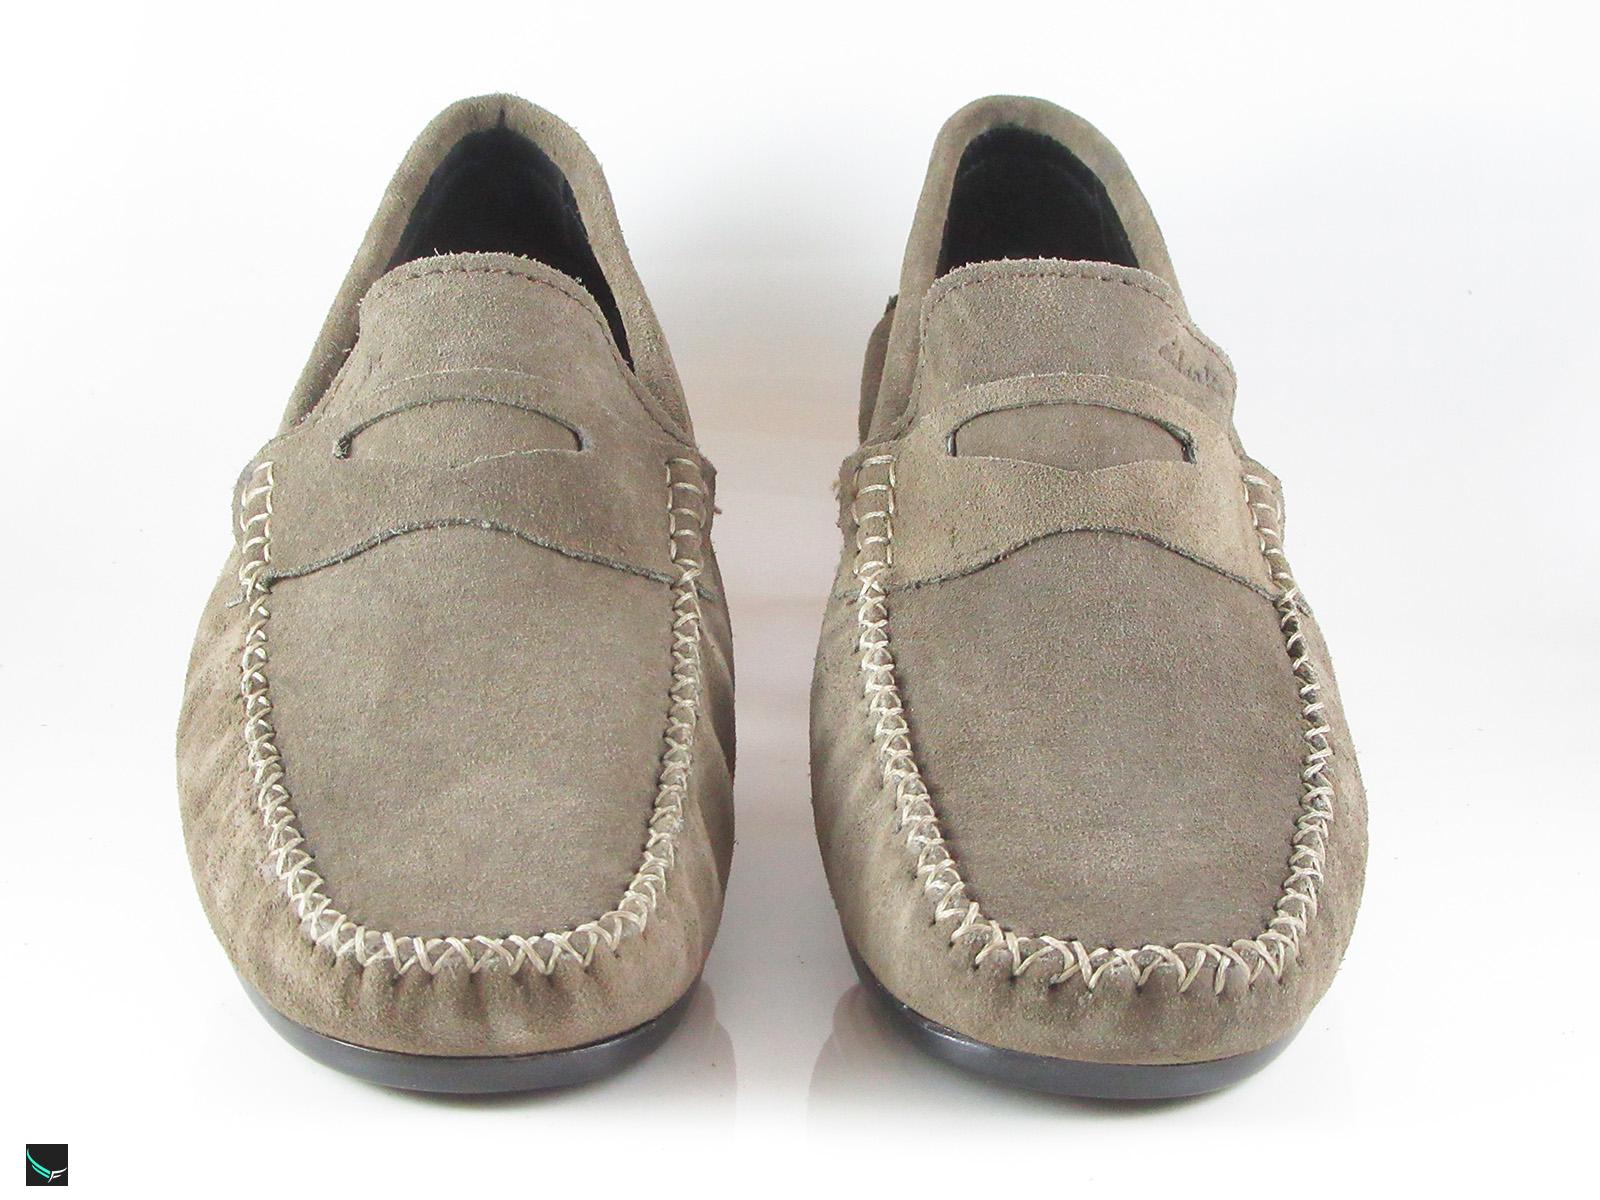 Hand Stitching Loafers In Suede For Men's - 4710 - Leather Collections ...